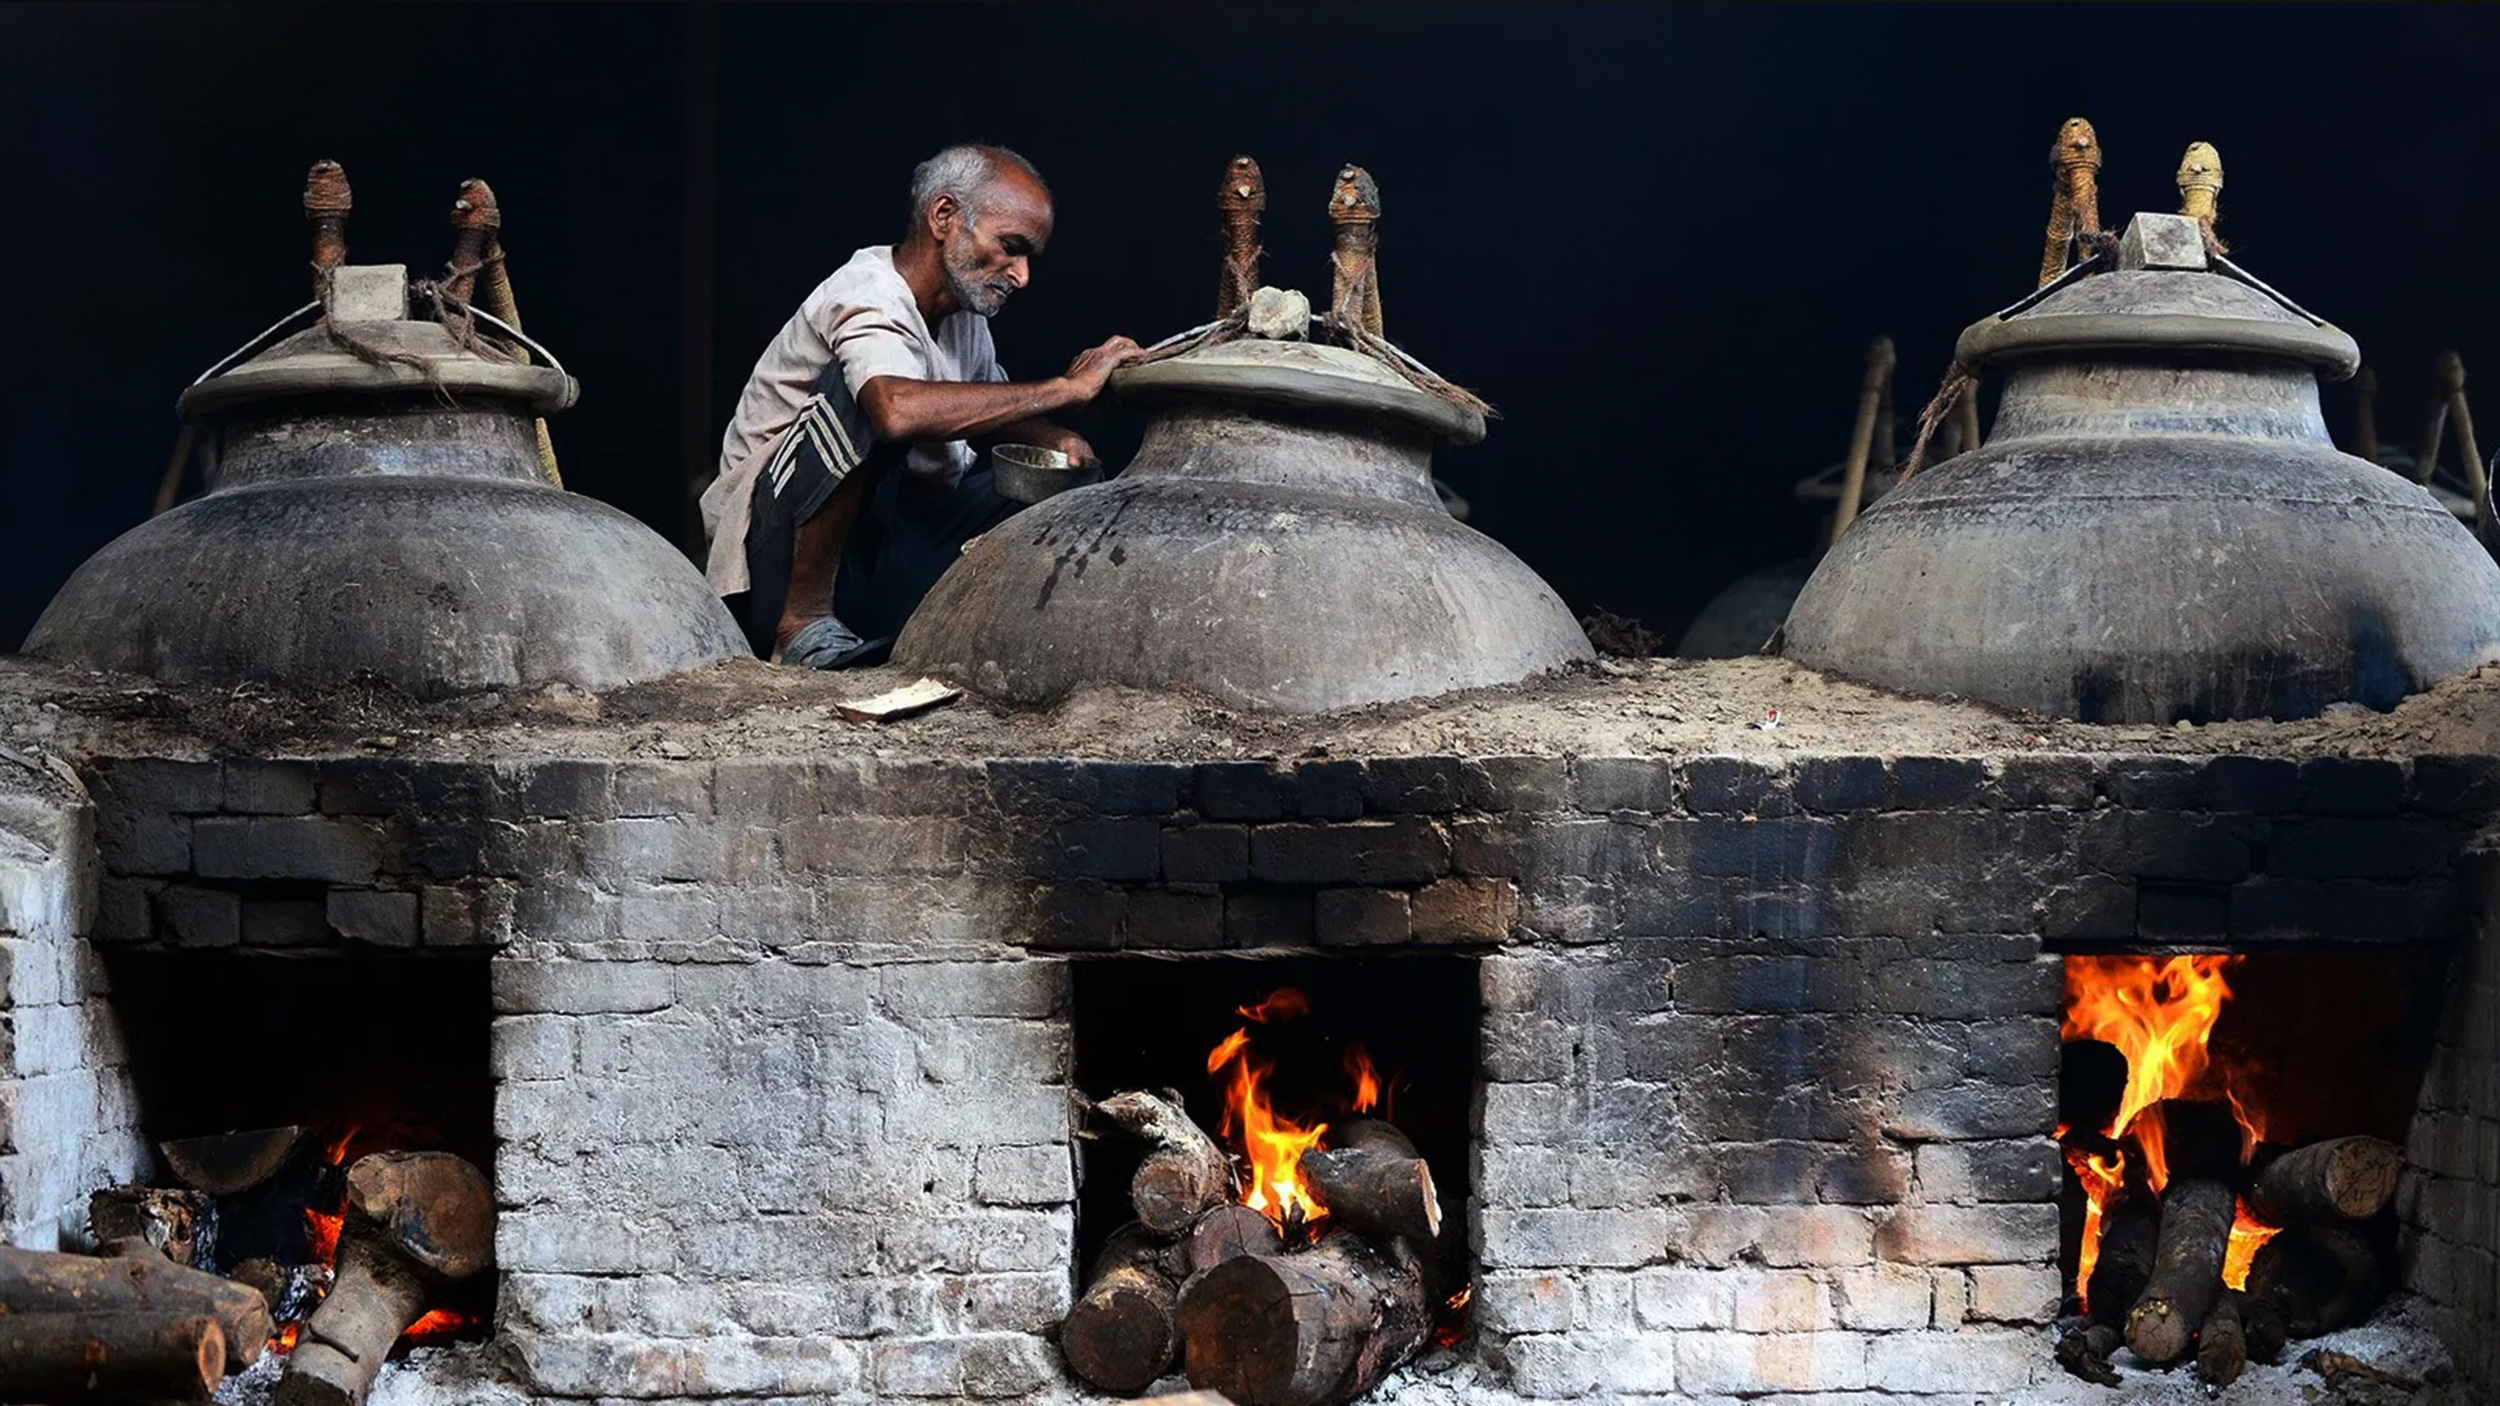 A man is using mitti attar on a clay pot in front of a fire.